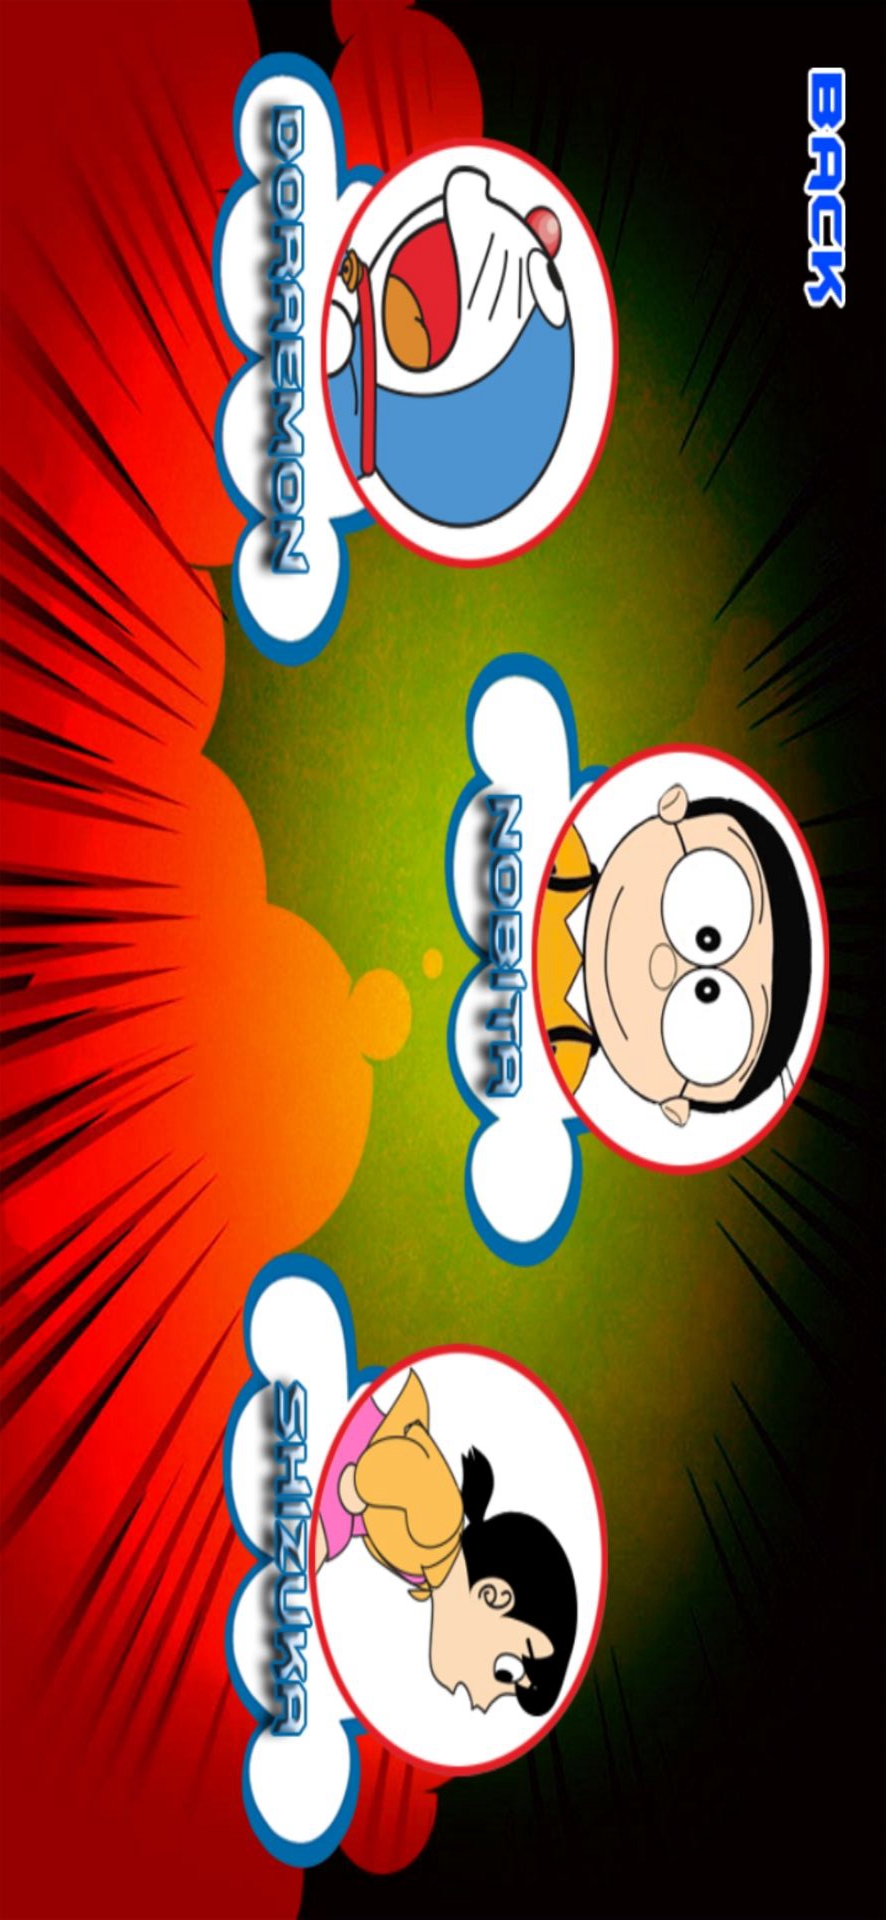 Doraemon: on the cloud 2(A lot of gold coins)